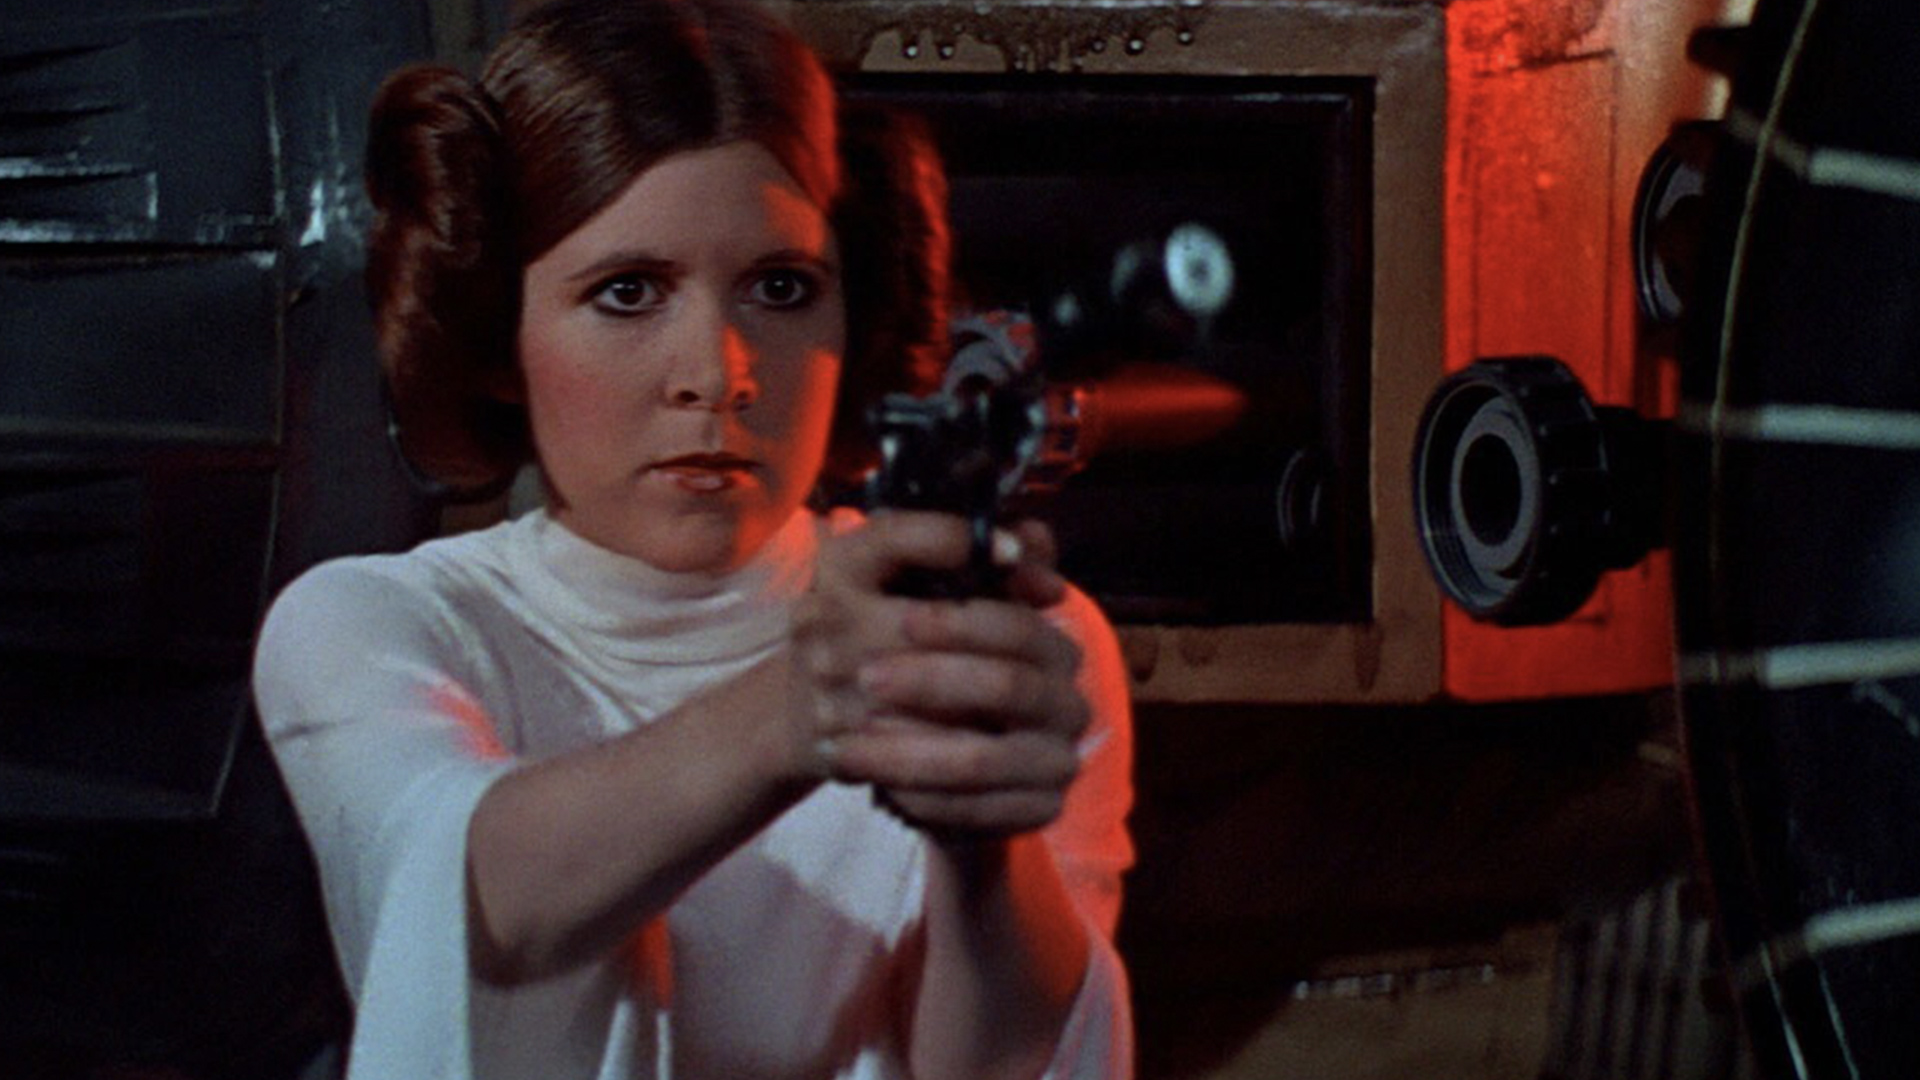 Princess Leia from Star Wars holding a blaster